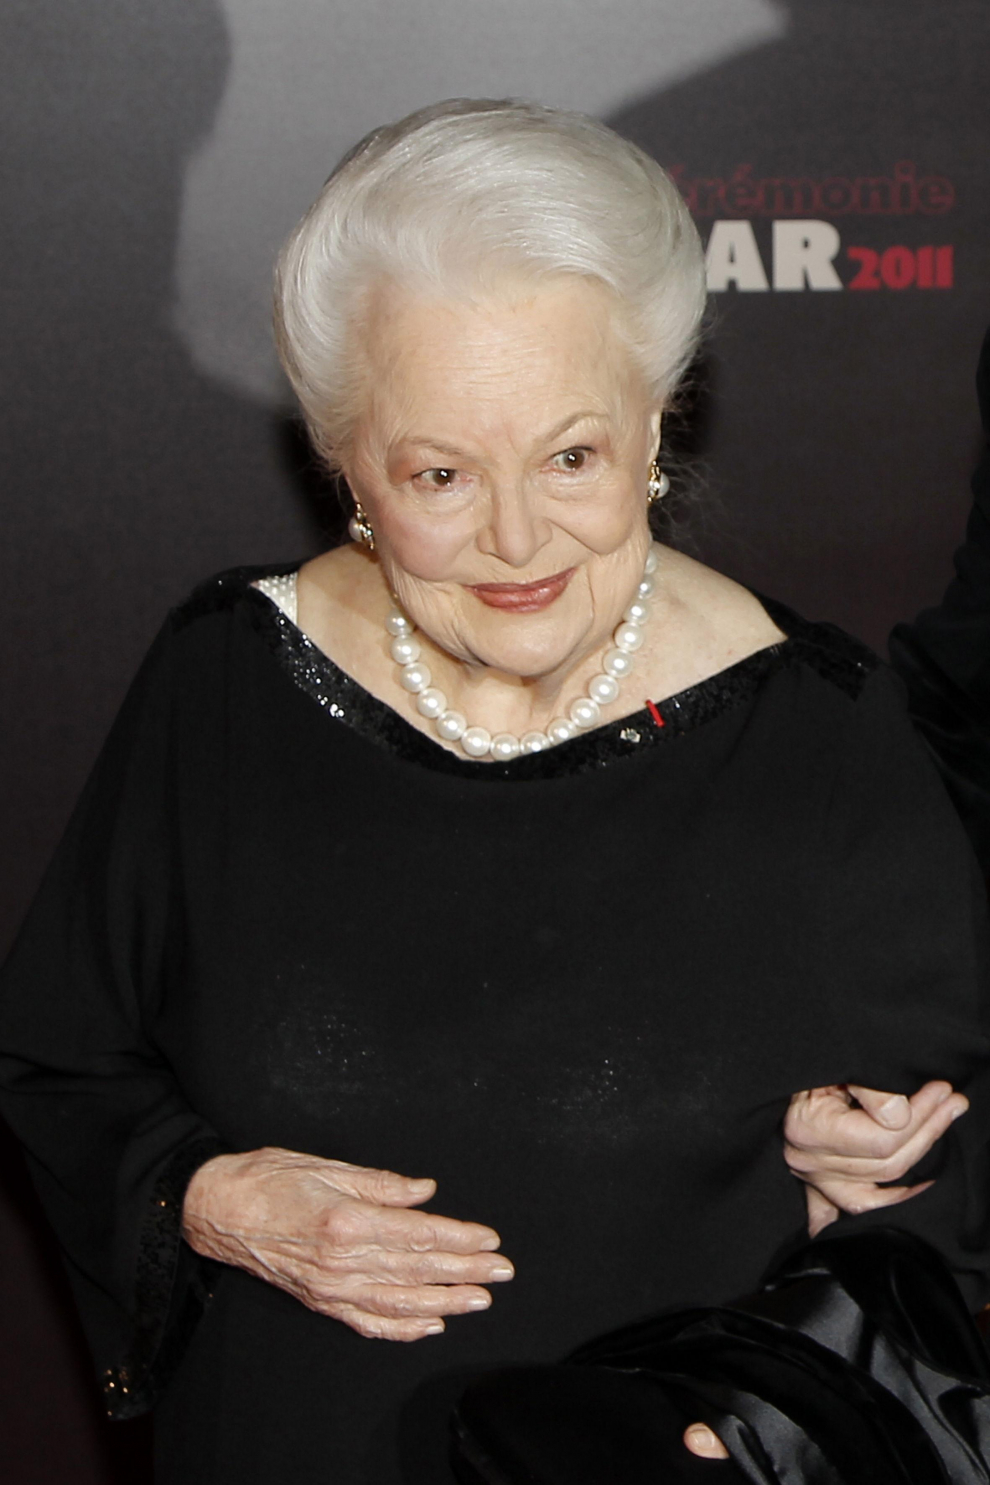 Paris (France).- (FILE) - A file picture dated 25 February 2011 shows British-US actress Olivia de Havilland arriving for the 36th Cesar awards ceremony at the Chatelet Theatre in Paris, France (reissued 26 July 2020). According to media reports, Olivia de Havilland has died aged 104. (Cine, Francia, Estados Unidos) EFE/EPA/IAN LANGSDON *** Local Caption *** 52848550 Olivia de Havilland dies at 104